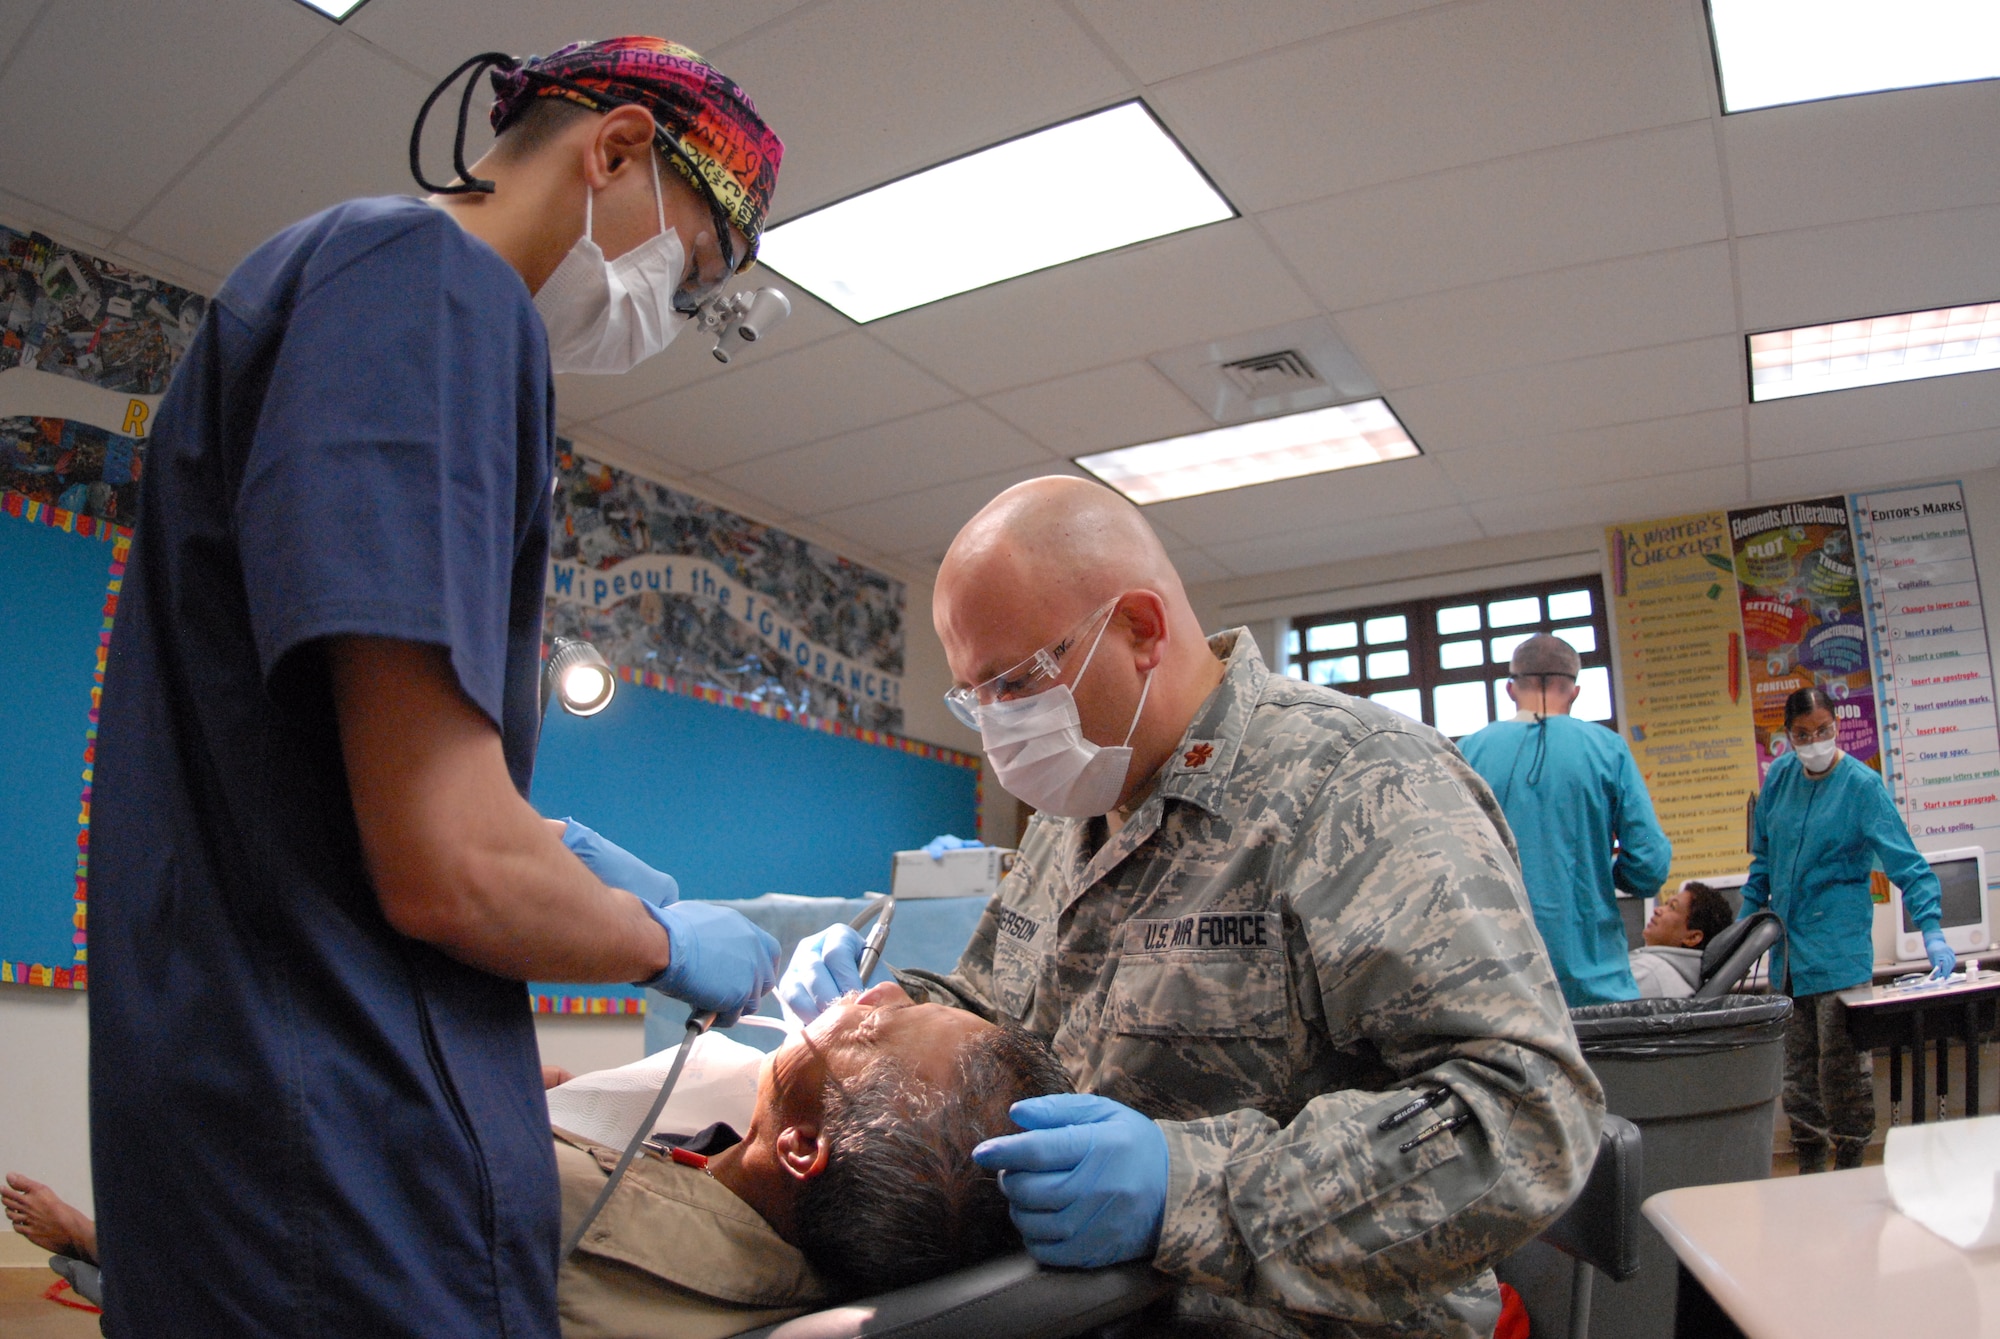 Oregon Air National Guard Maj. Paul Anderson, a 173rd Medical Group general dentist treats a dental patient at the Iao Intermediate School in Wailuku, Hawaii, June 9, 2013. Over 500 U.S. service members spread across Hawaii for Tropic Care 2013, an innovative readiness training exercise offering free health care to medically underserved areas of the state. (U.S. Air National Guard photo by Senior Airman Michael Quiboloy)